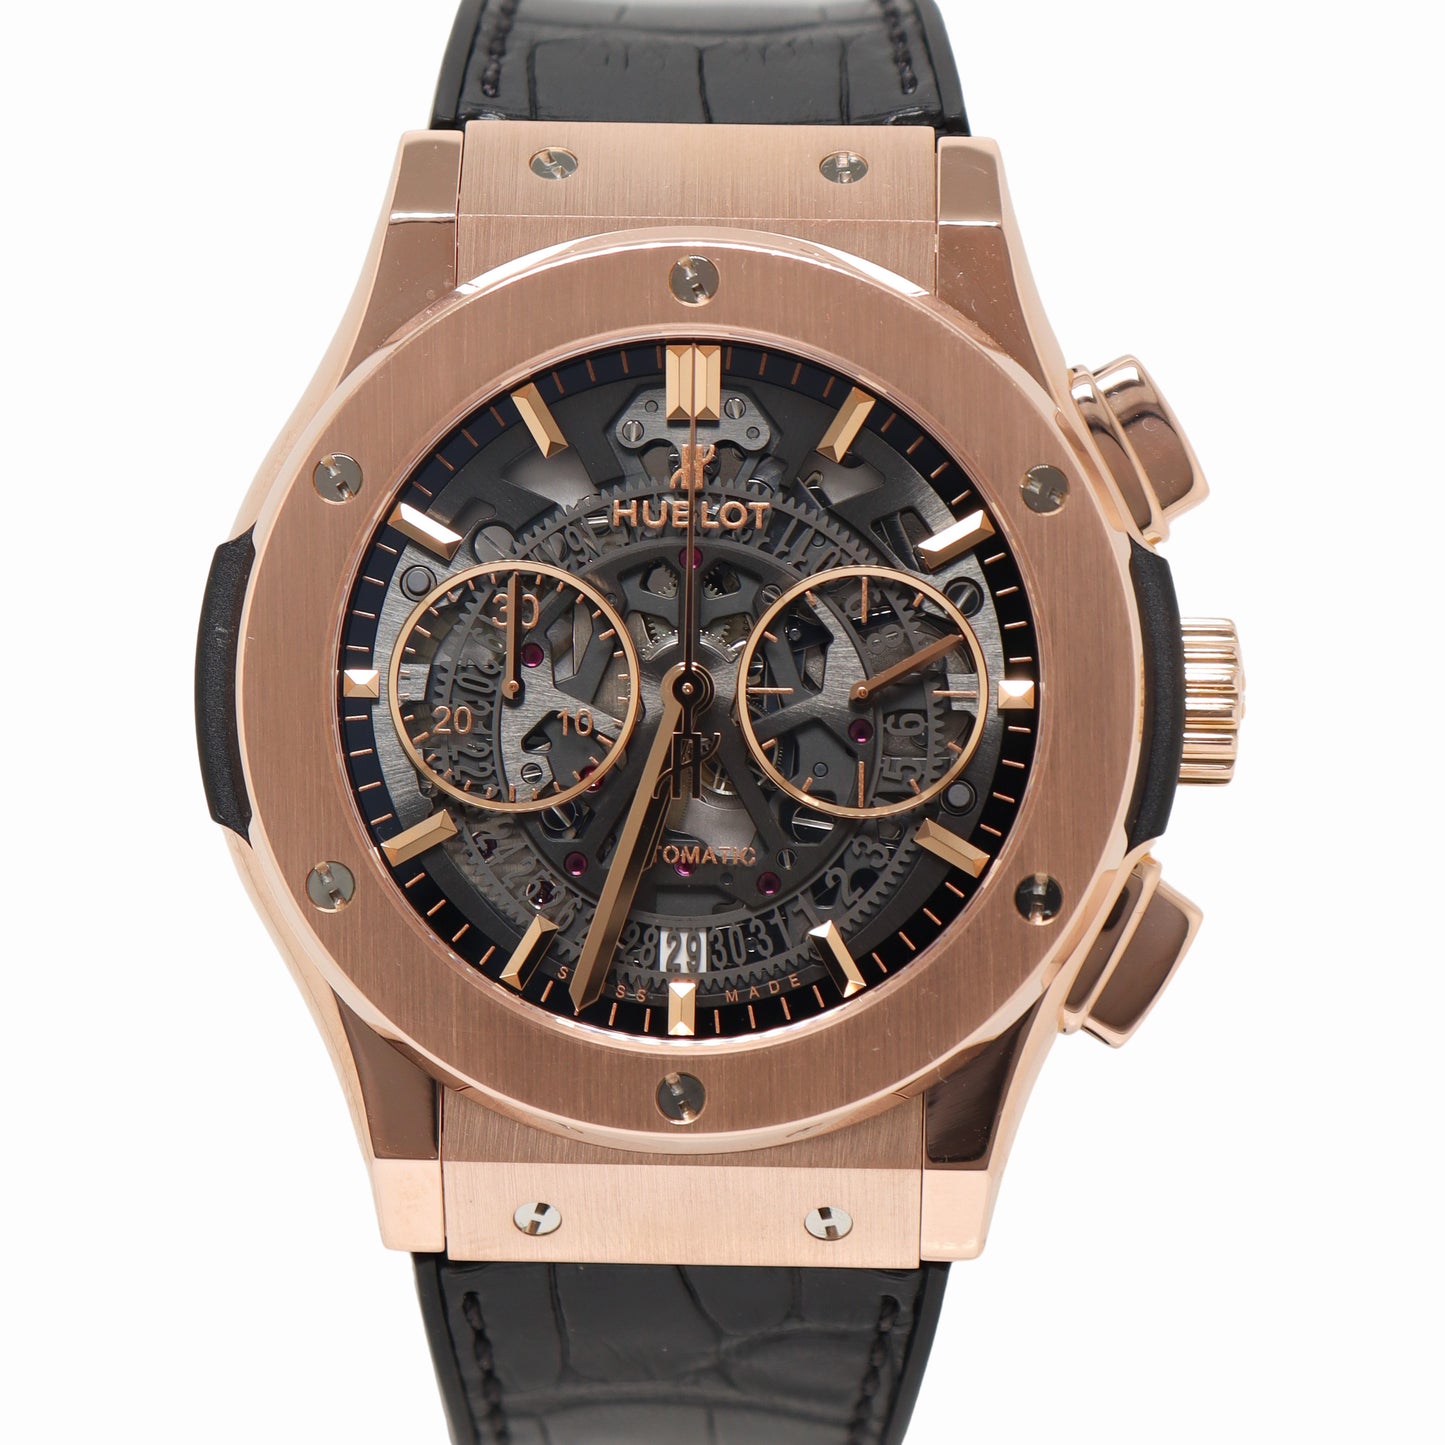  Hublot Classic Fusion 18kt Rose Gold White Dial